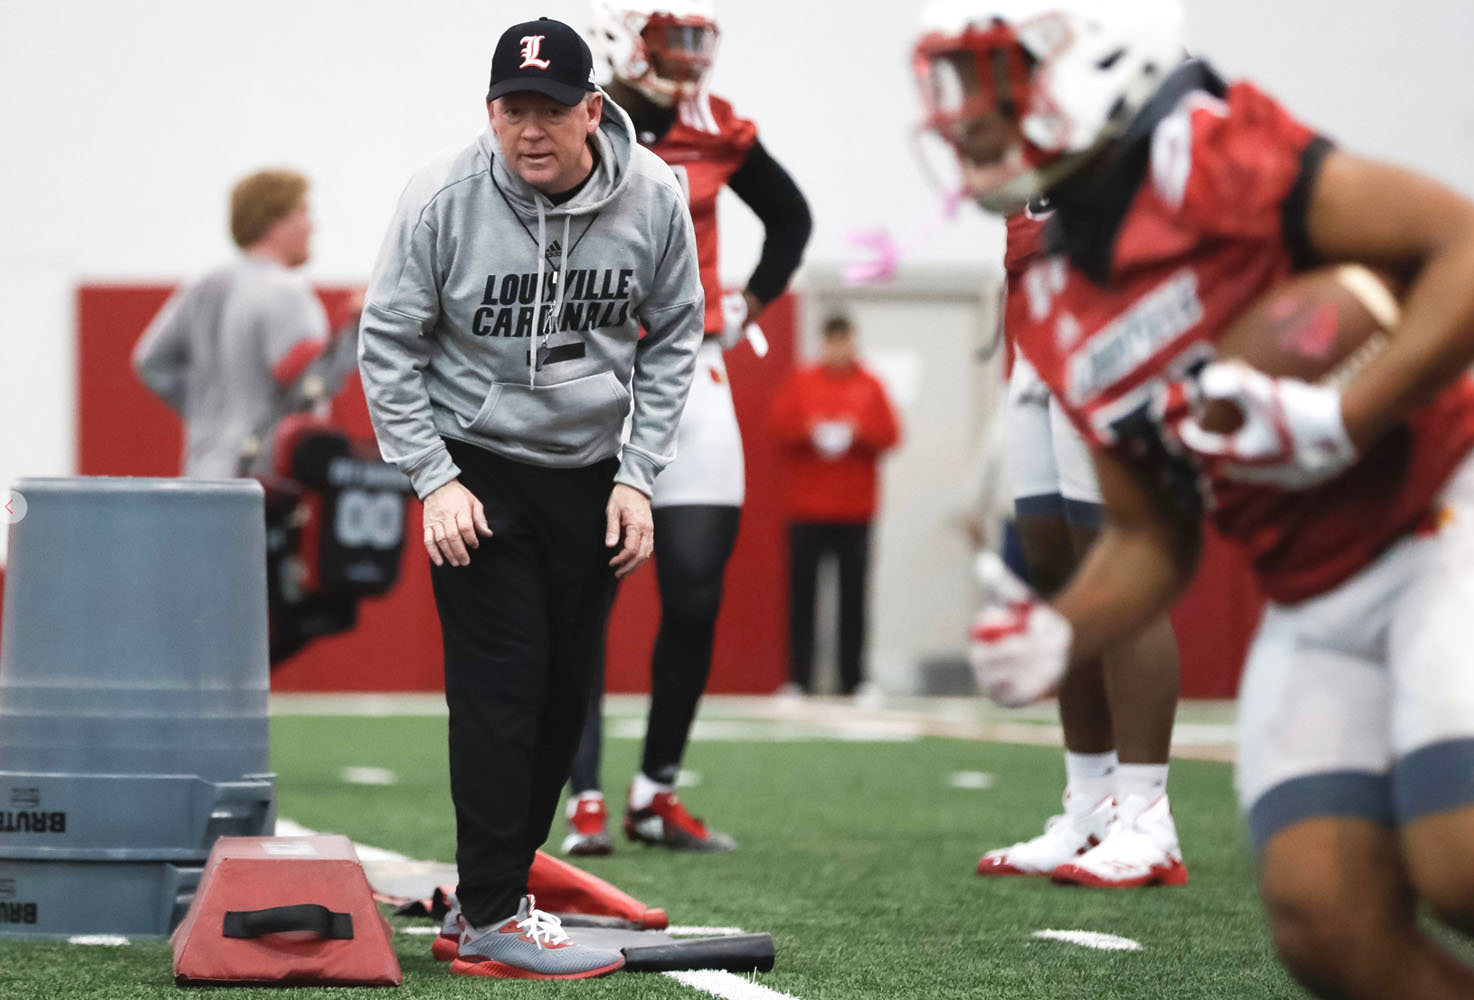 Bobby Petrino last coached at the University of Louisville in 2018.